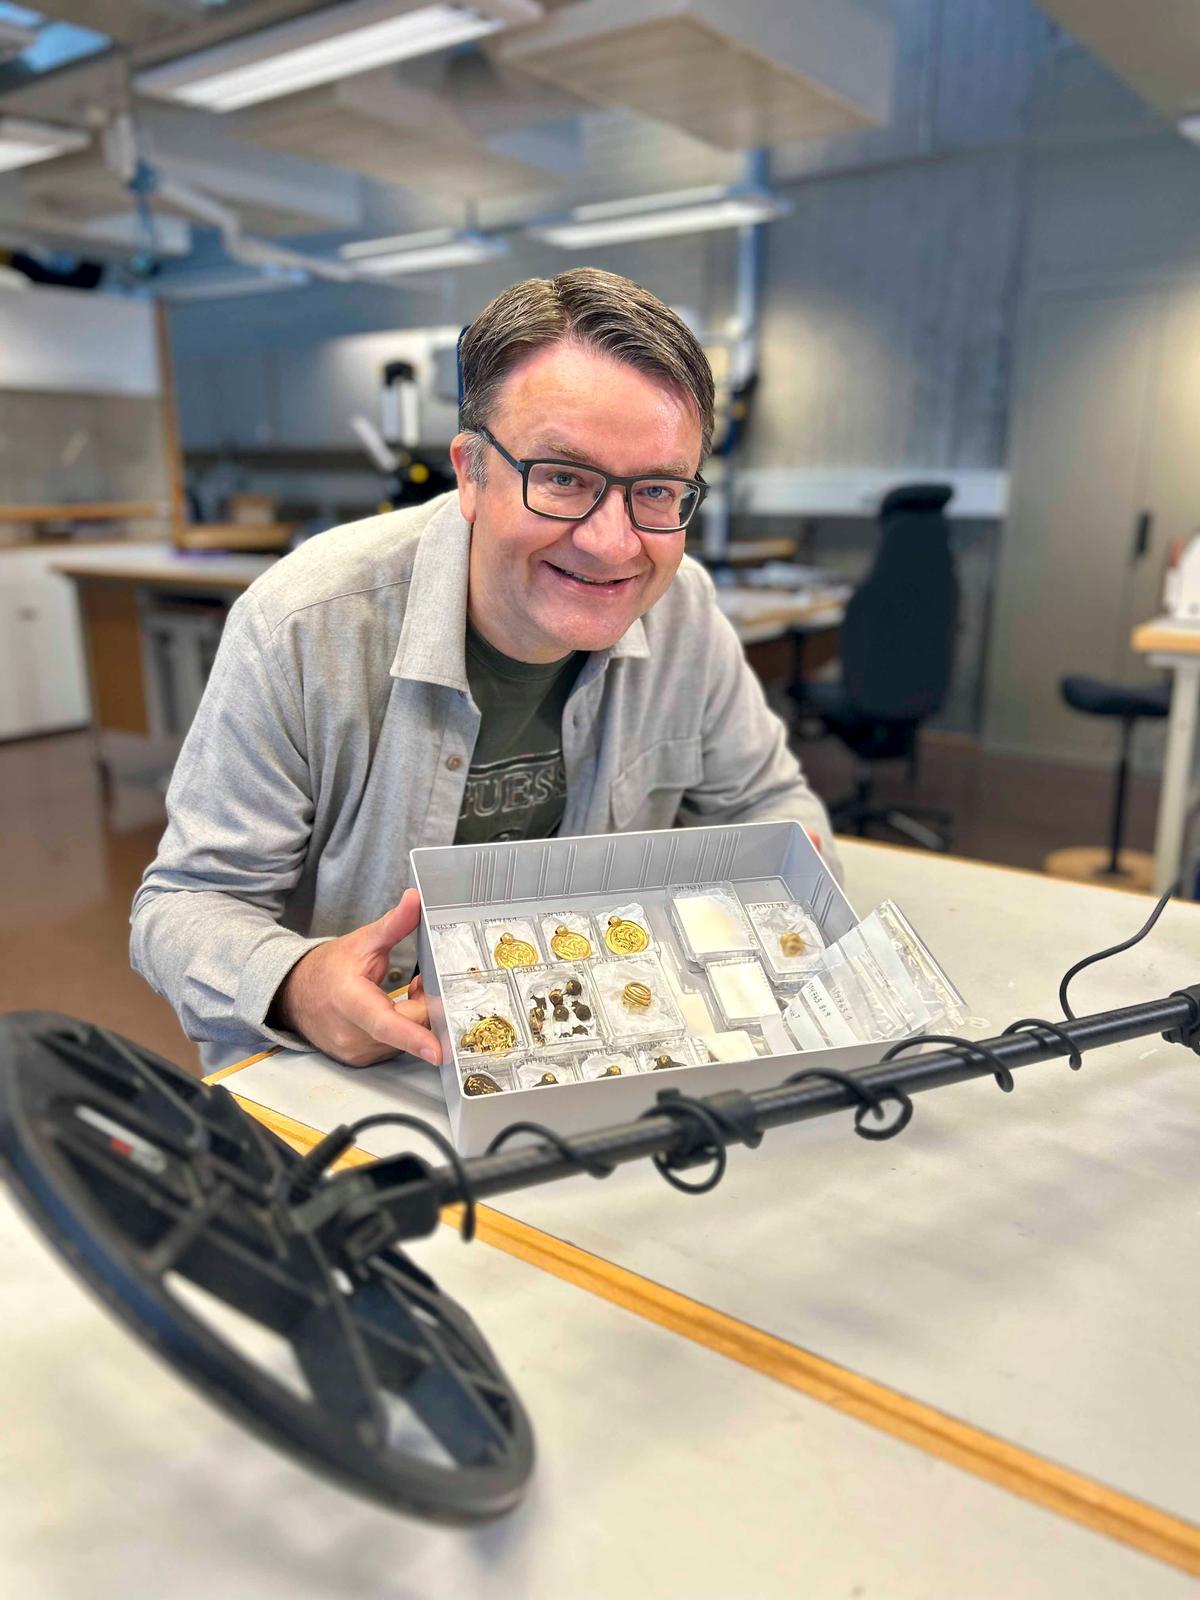 Mr. Bore with the 6th-century gold jewelry and his metal detector. Initially, he thought these were some "chocolate coins or plastic pirate treasure." (© Anniken Celine Berger – The Museum of Archaeology, University of Stavanger)